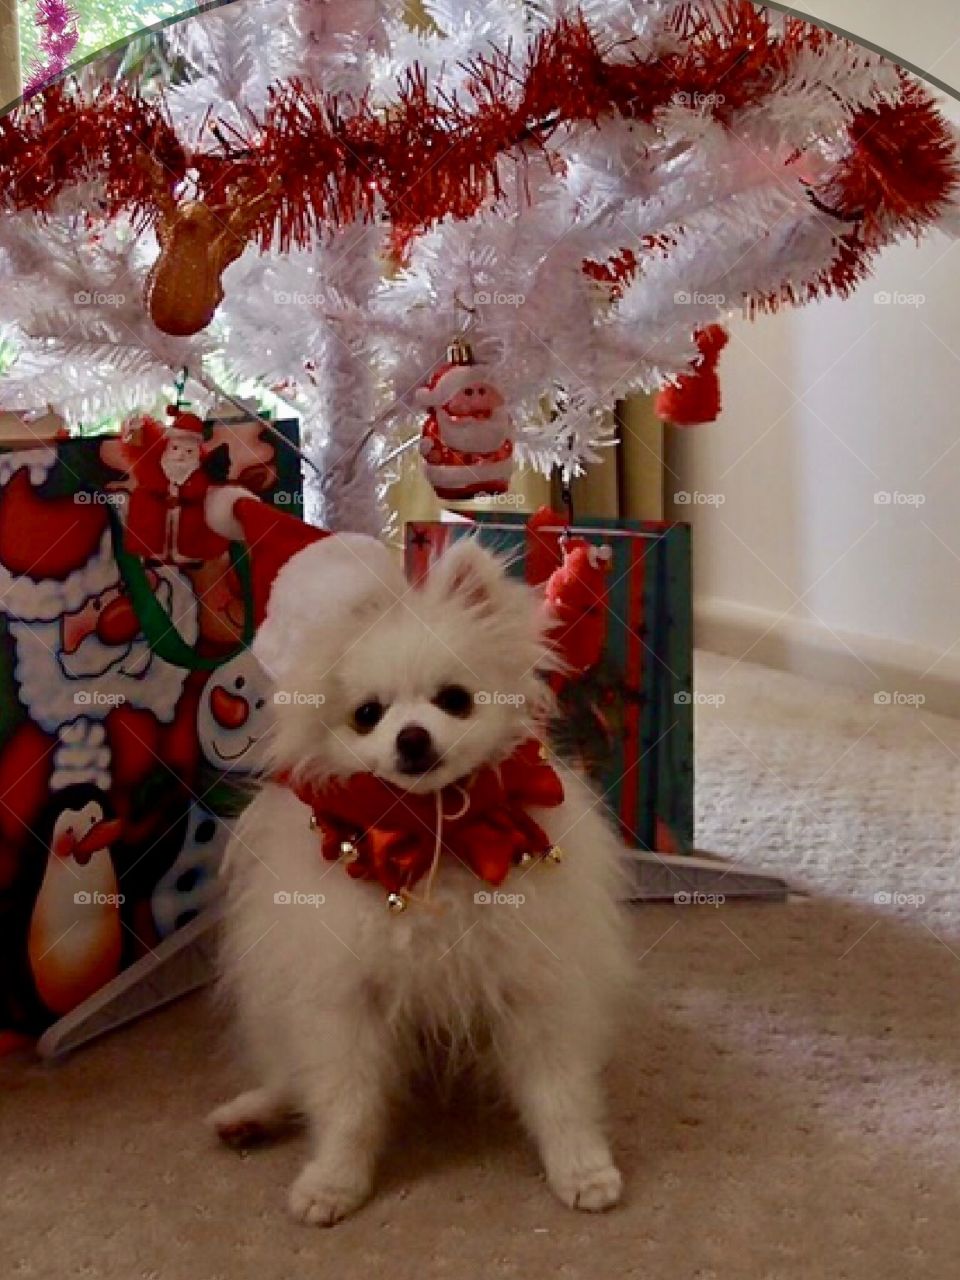 Decorating Christmas time - wonderful season of the year with cute little Pom Snowie  at Cheltenham Melbourne Australia 